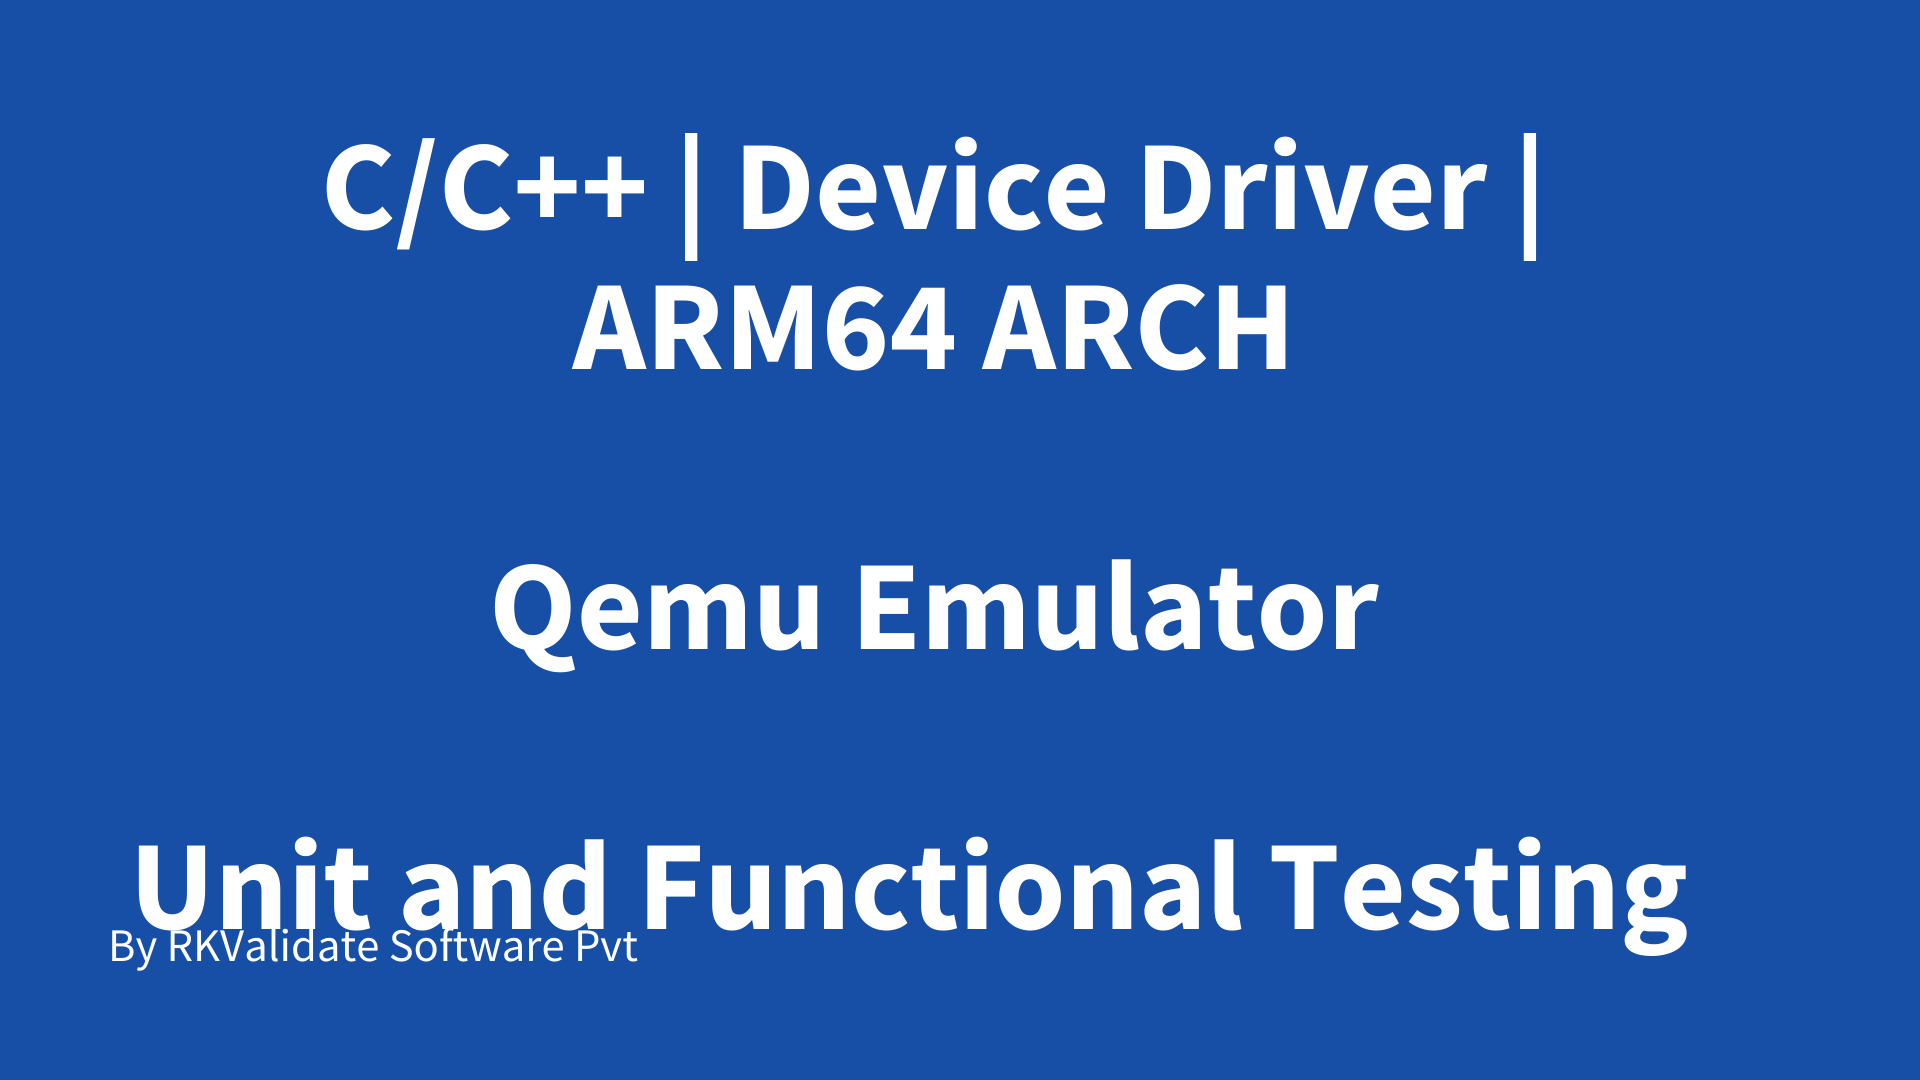 Device Driver ARM64 ARCH